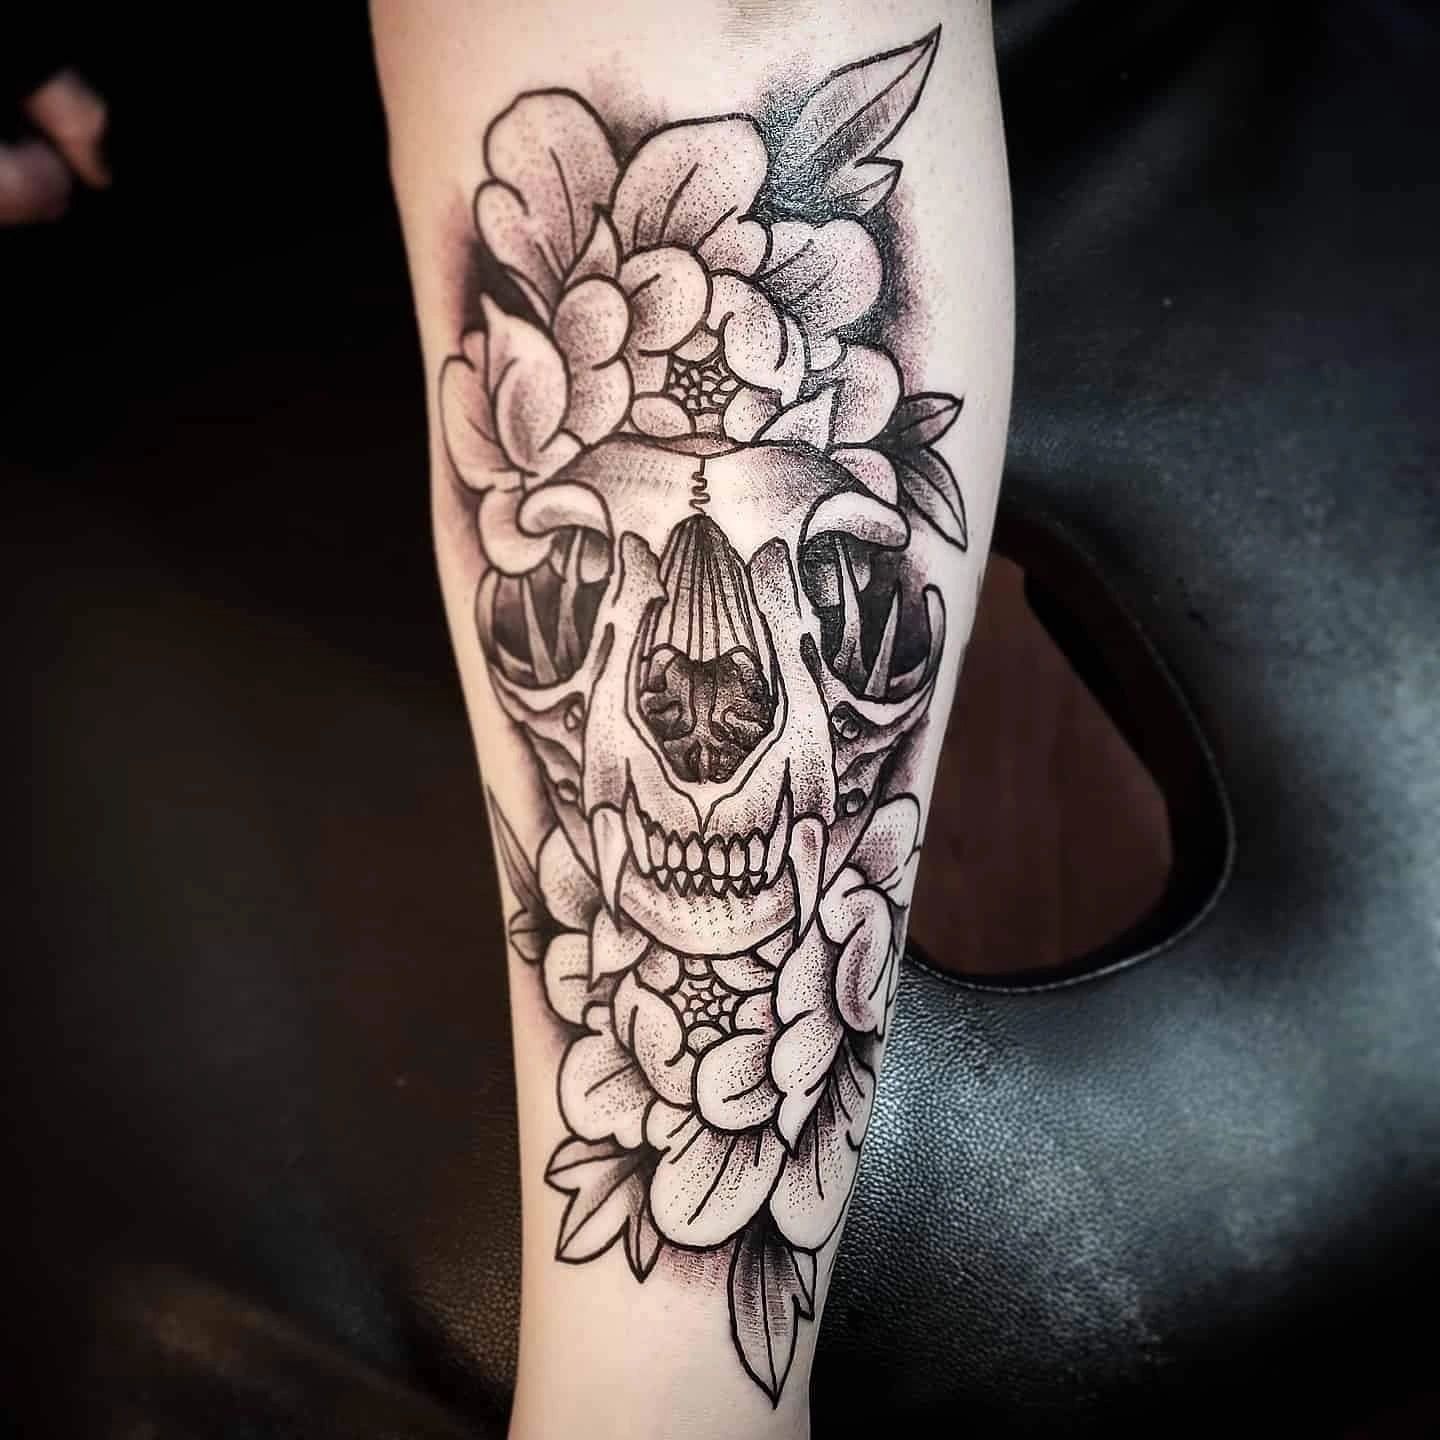 Alchemy Tattoo Collective - Tattoos and Piercings - Salem, Oregon